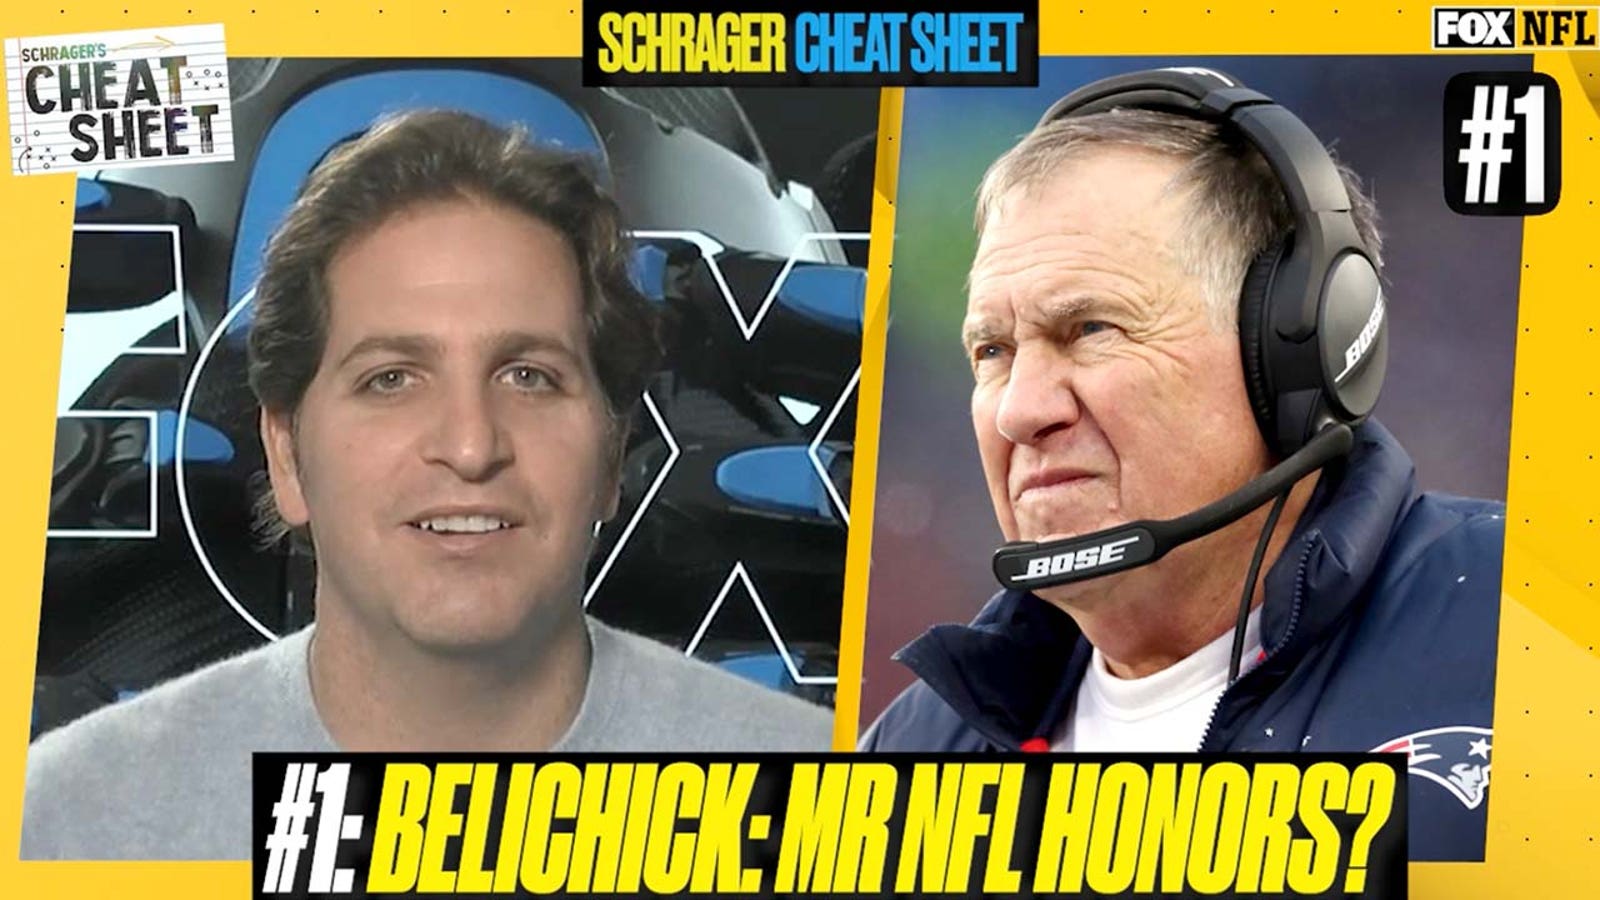 Peter Schrager: Bill Belichick is heading for Coach of the Year and NFL Executive of the Year I Cheat Sheet for Week 14